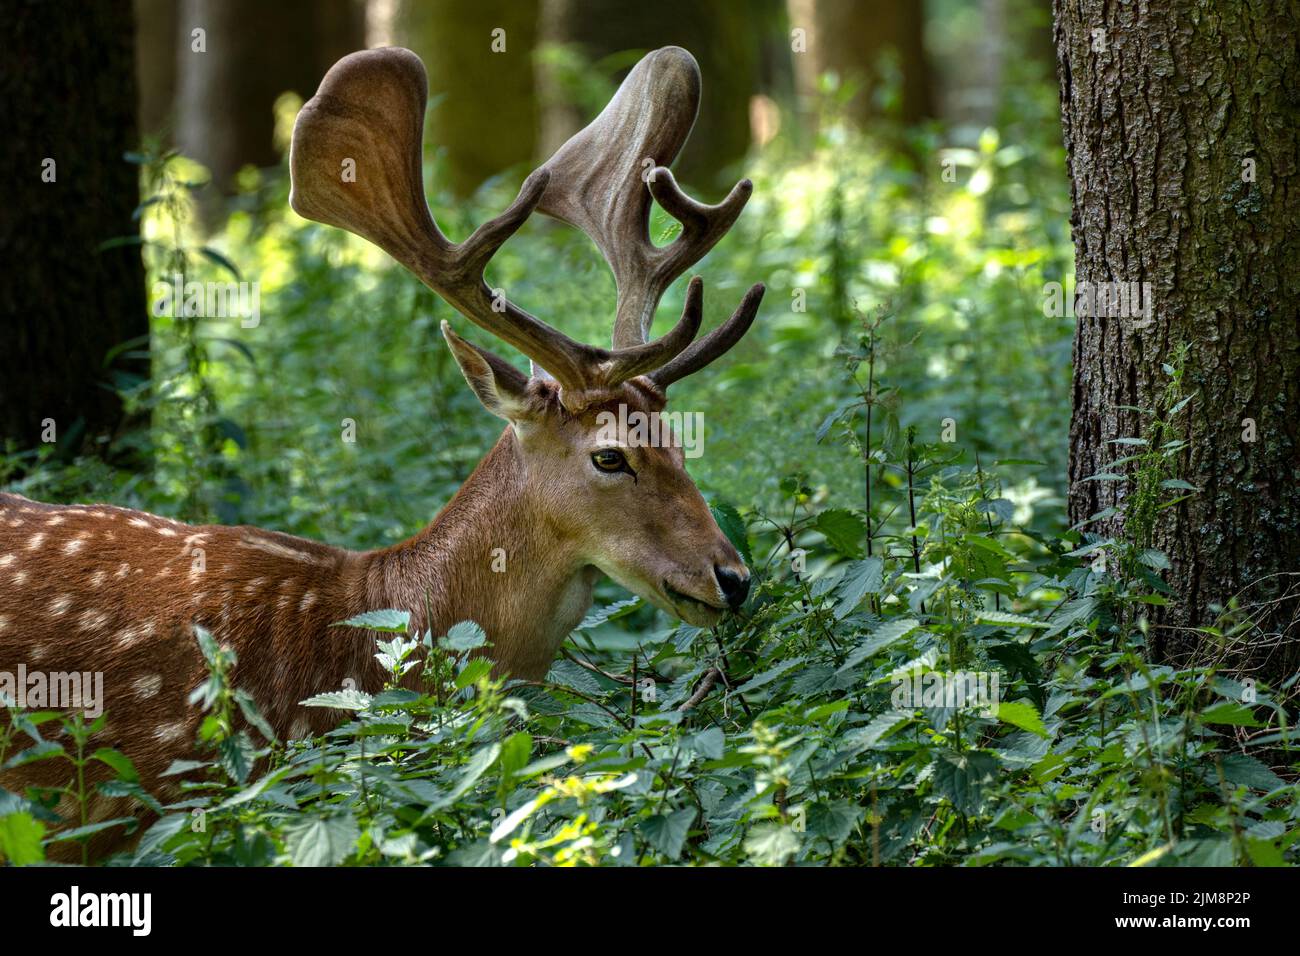 Fallow deer with antlers amidst plants in the forest Stock Photo